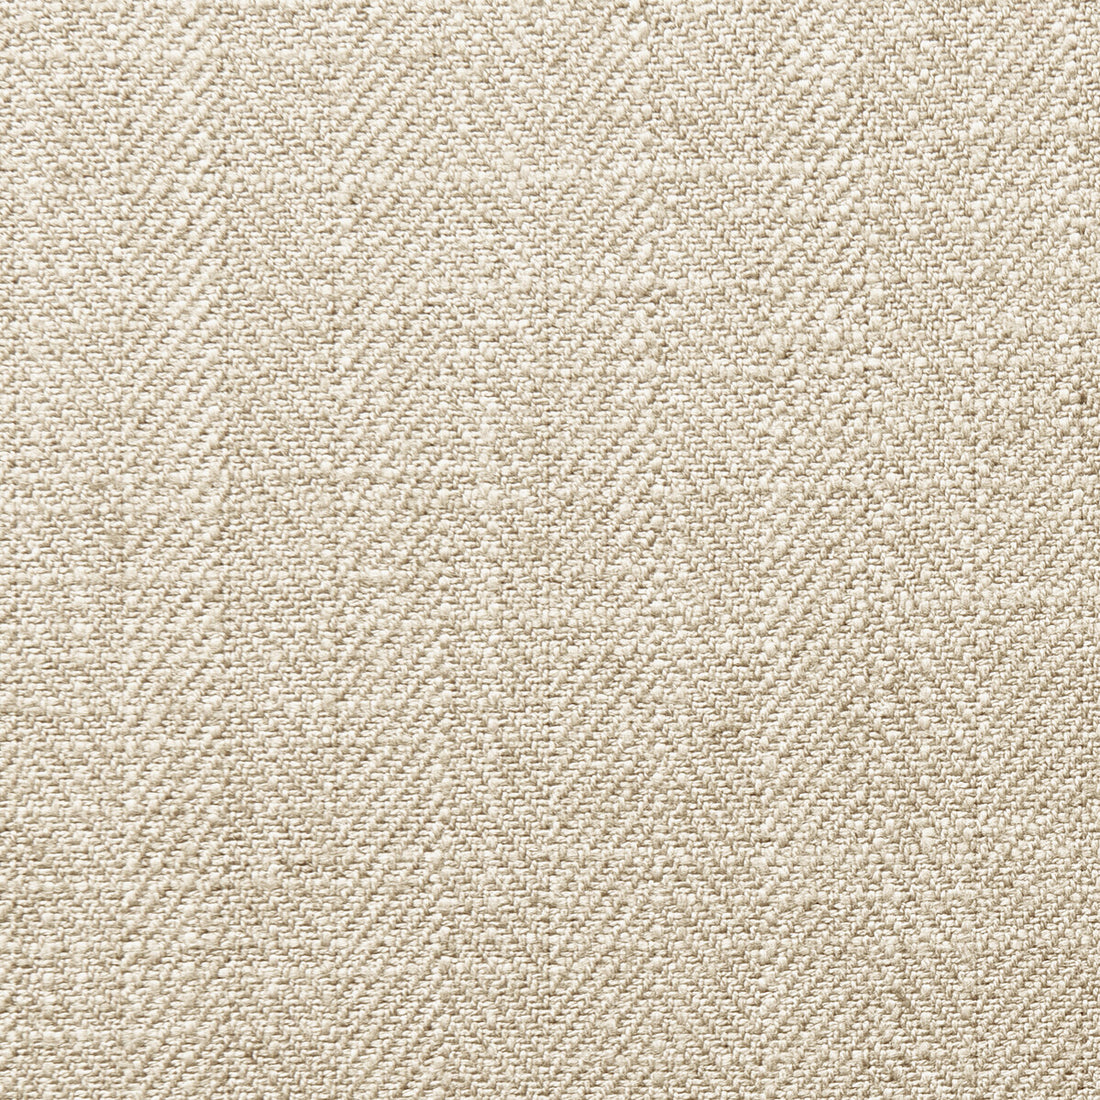 Henley fabric in stone color - pattern F0648/35.CAC.0 - by Clarke And Clarke in the Clarke &amp; Clarke Henley collection